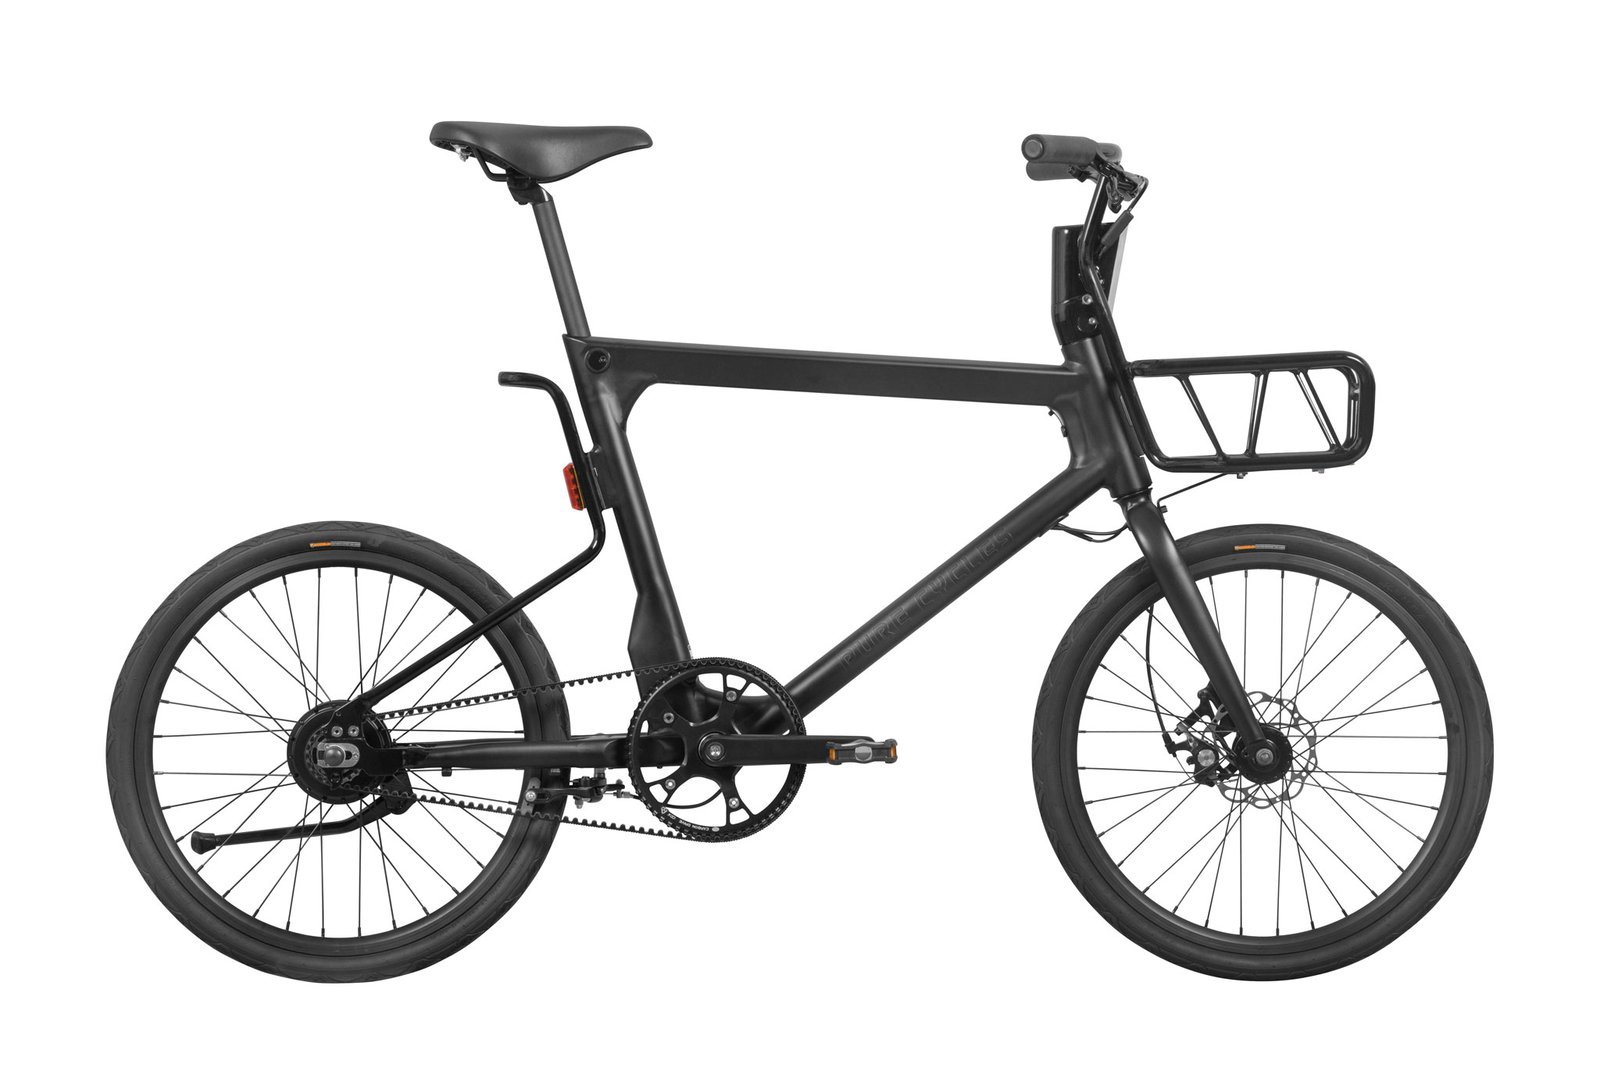 The Volat bicycle is very compact, making it an ideal choice for modeling for AR eCommerce apps.